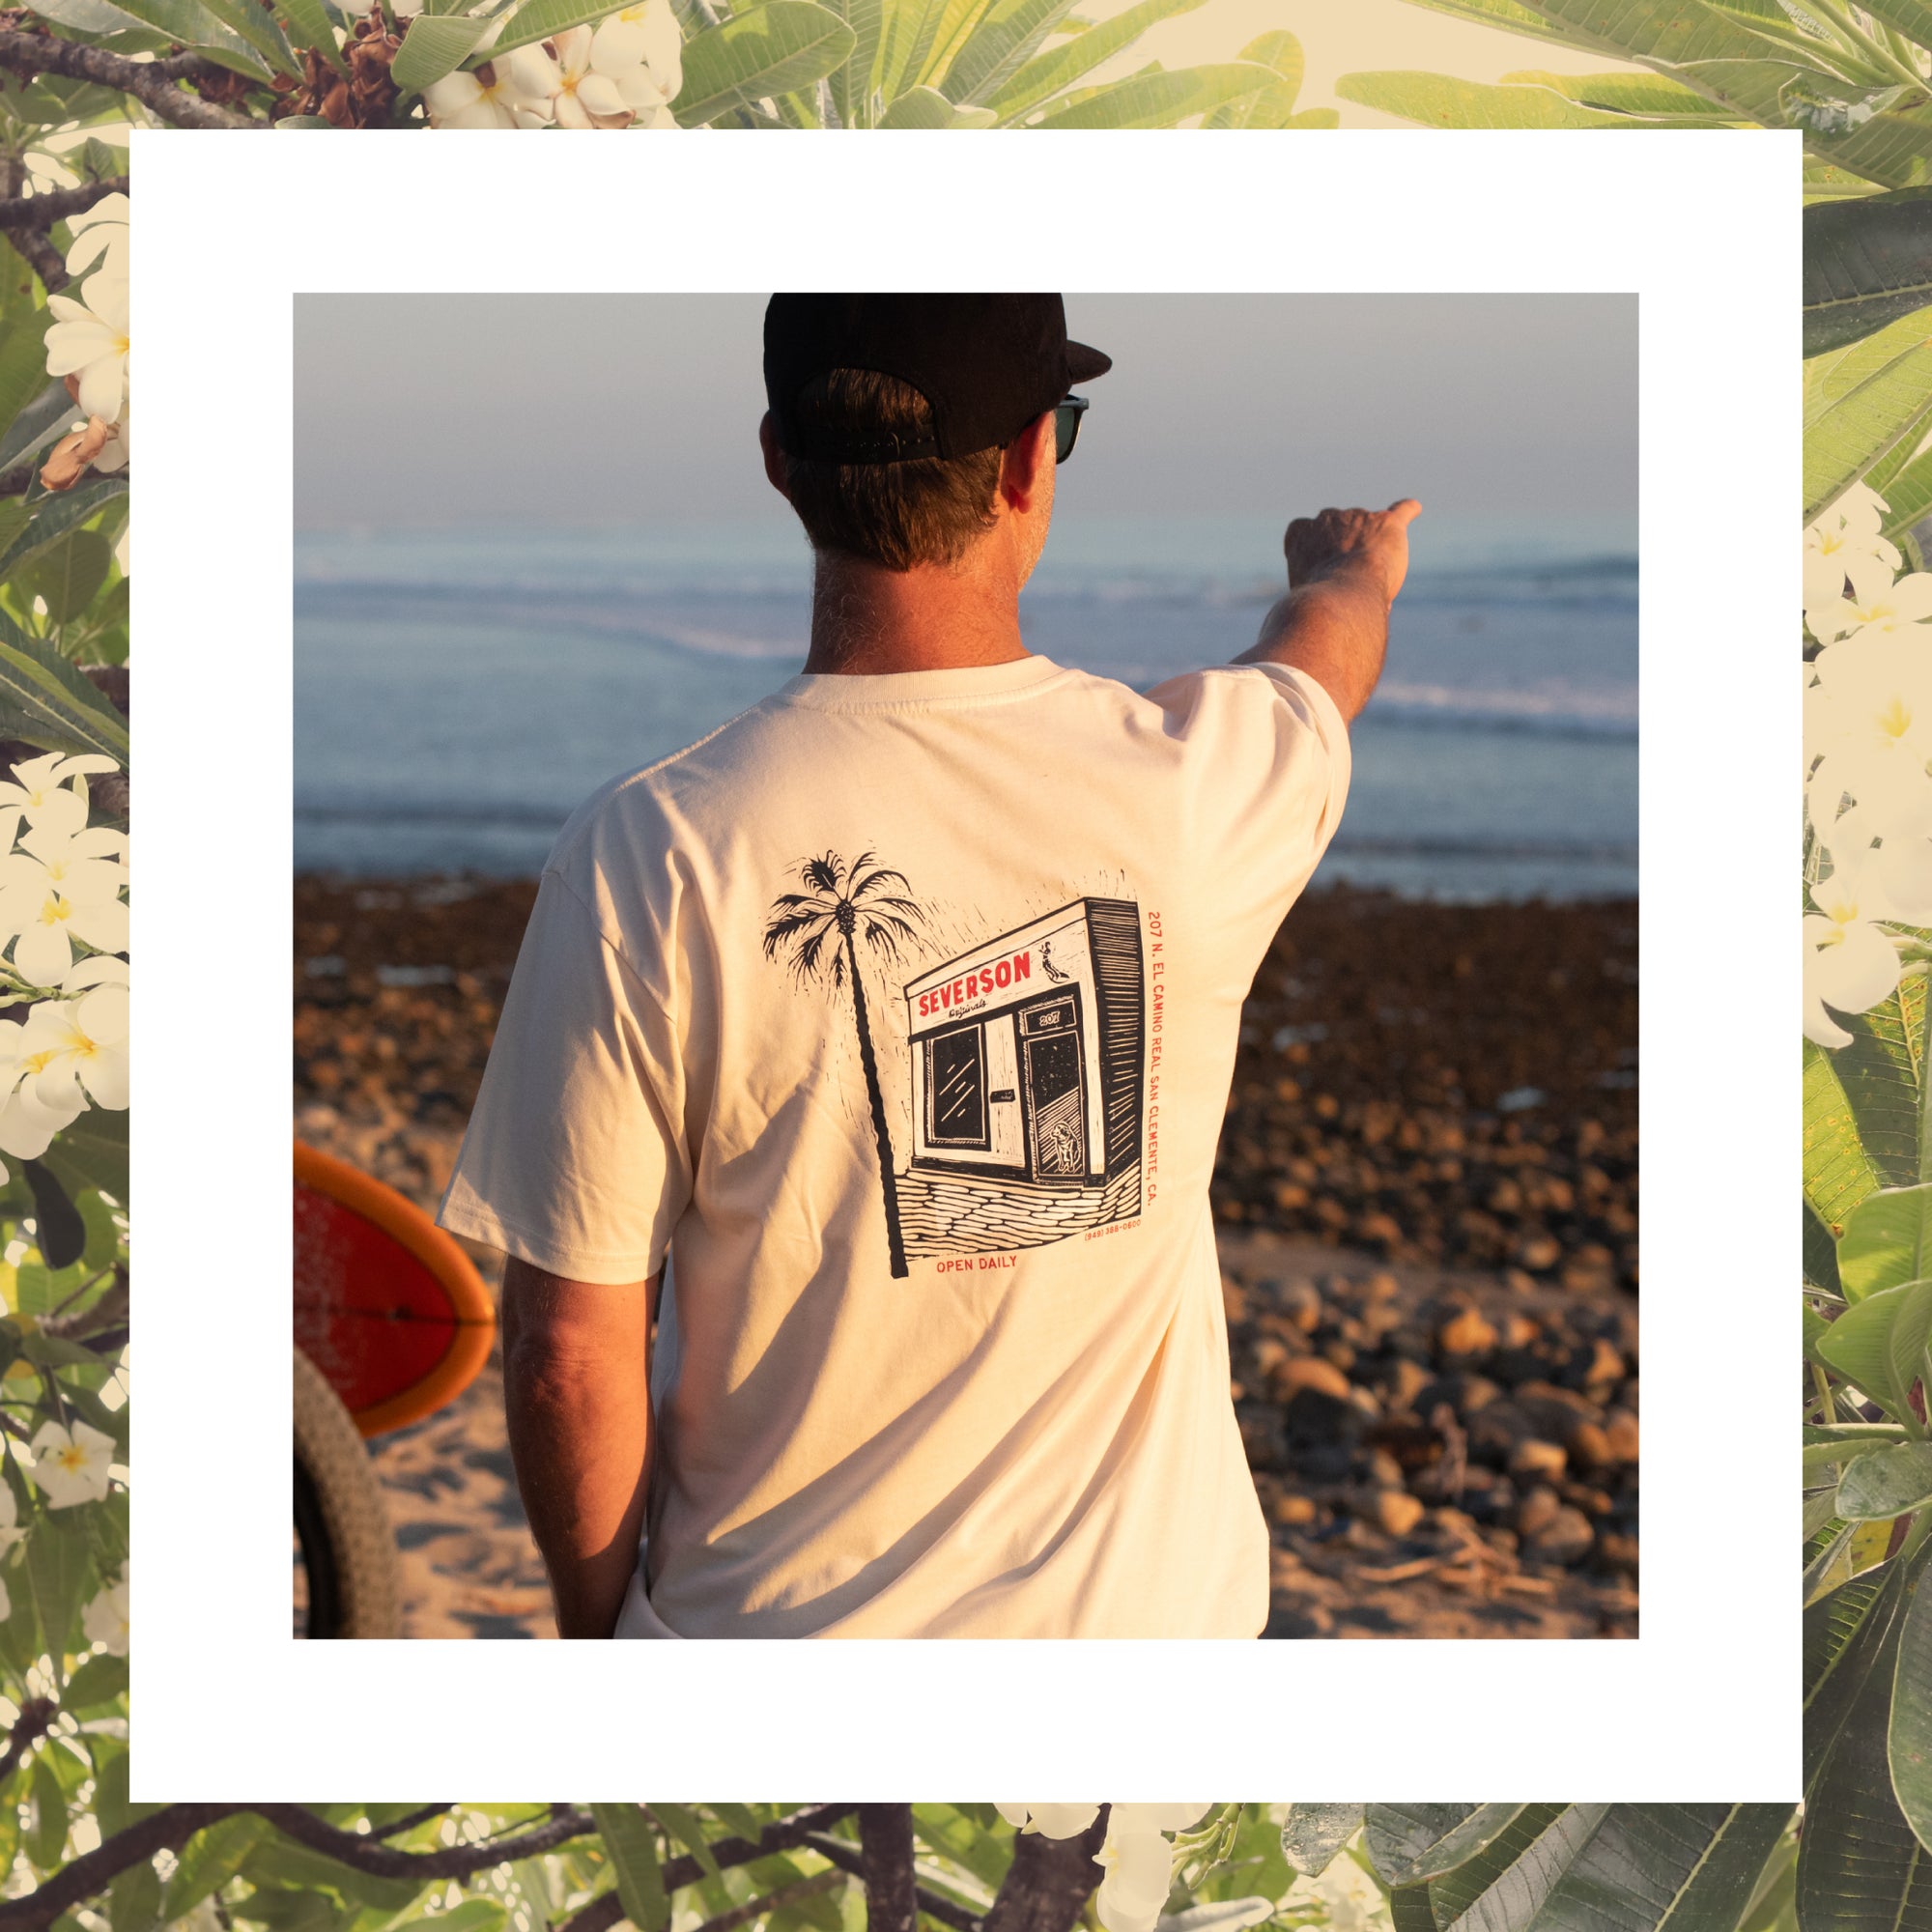 Photo of man looking at the waves down at Trestles, wearing the Severson 207 shop tee. 